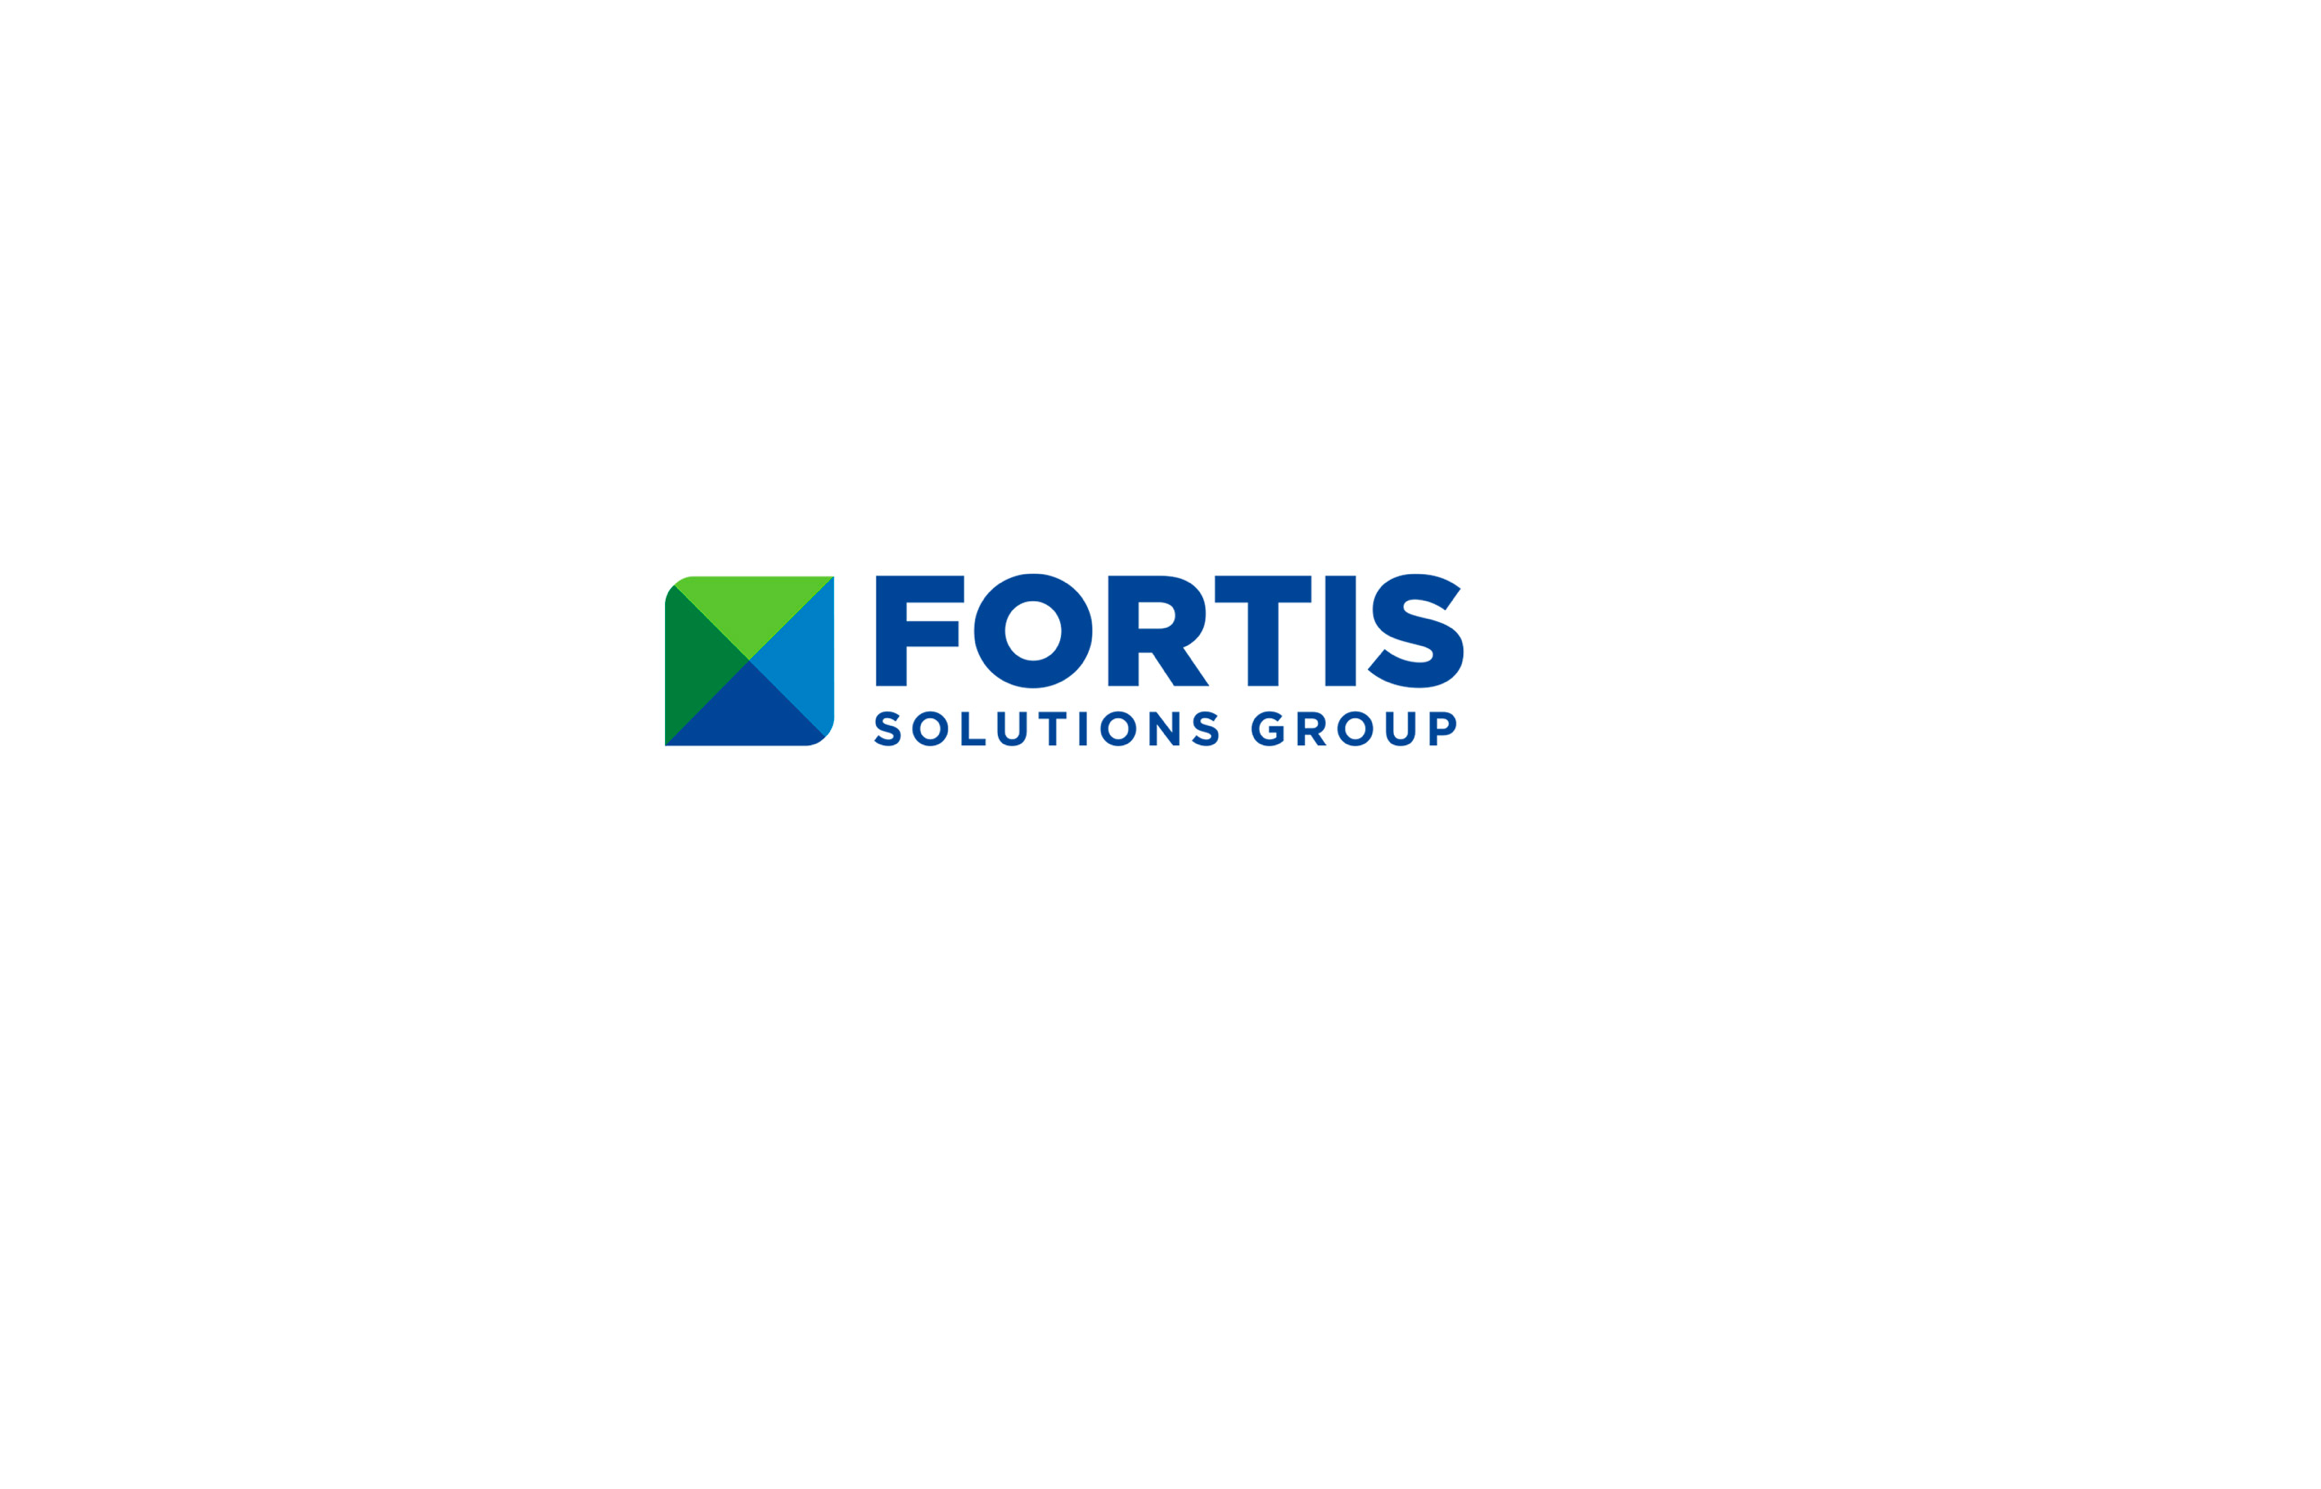 Fortis Solutions Group acquires Premier Georgia Printing and Labels and